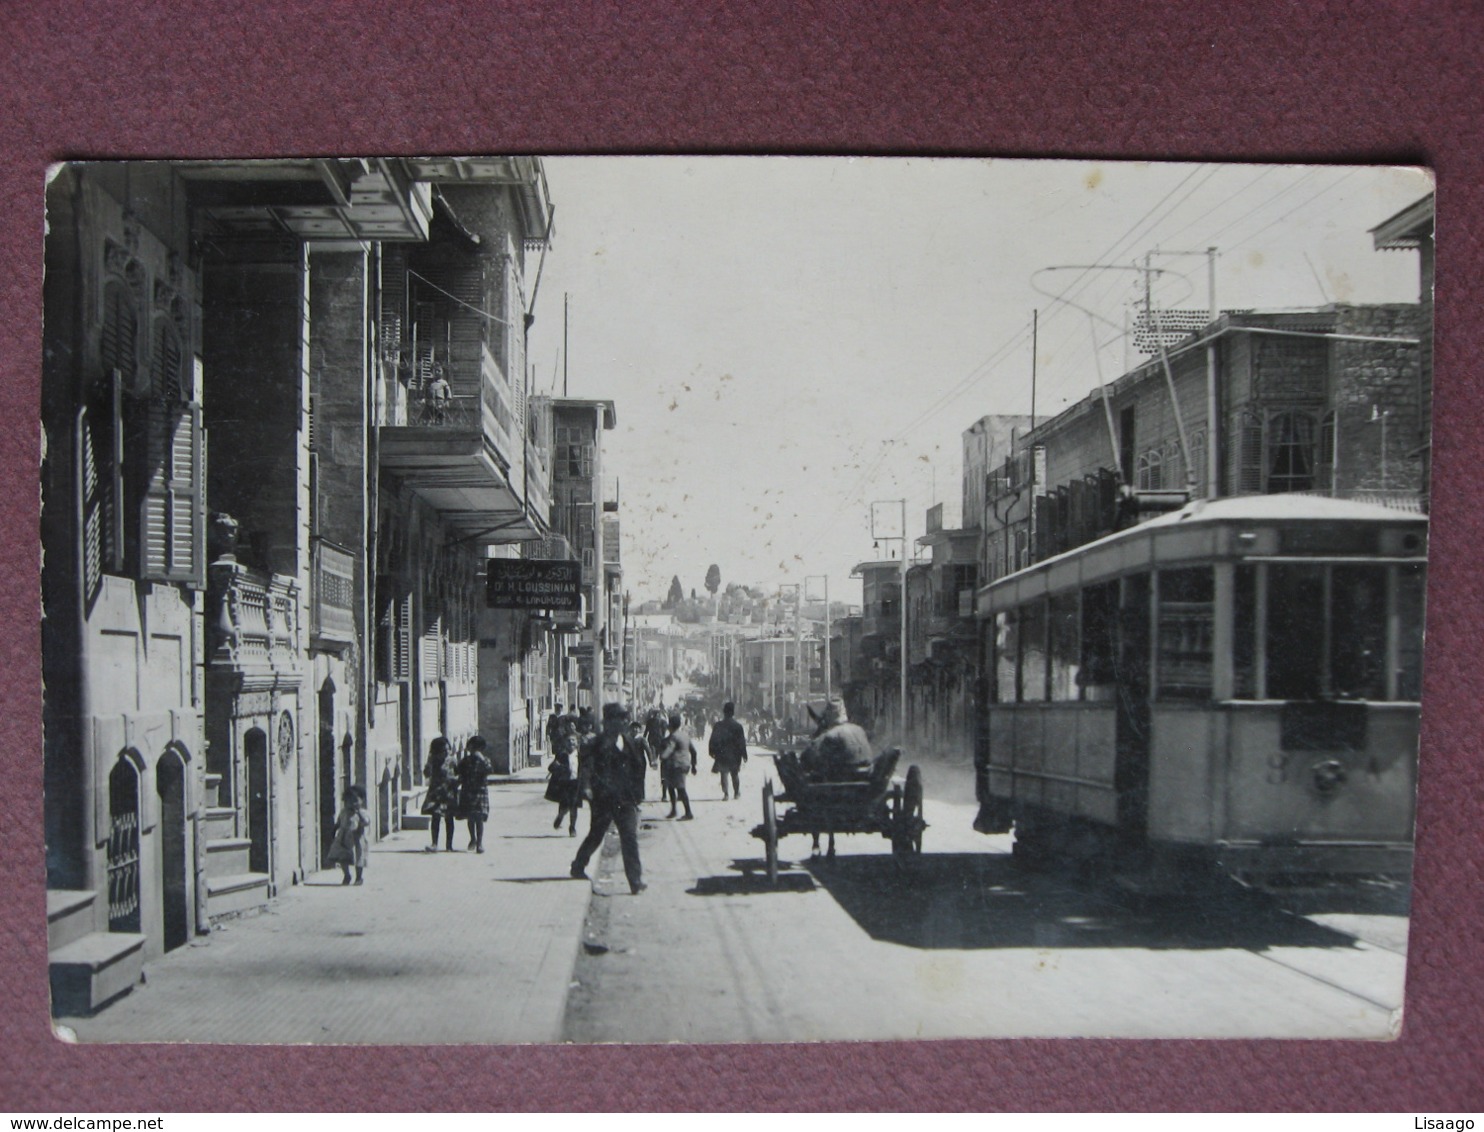 CPA PHOTO SYRIE ALEP Une Rue TRES ANIMEE TRAMWAY ATTELAGE Enseigne Lisible : Docteur H. LOUSSINIAN 1933 RARE ! - Syrien